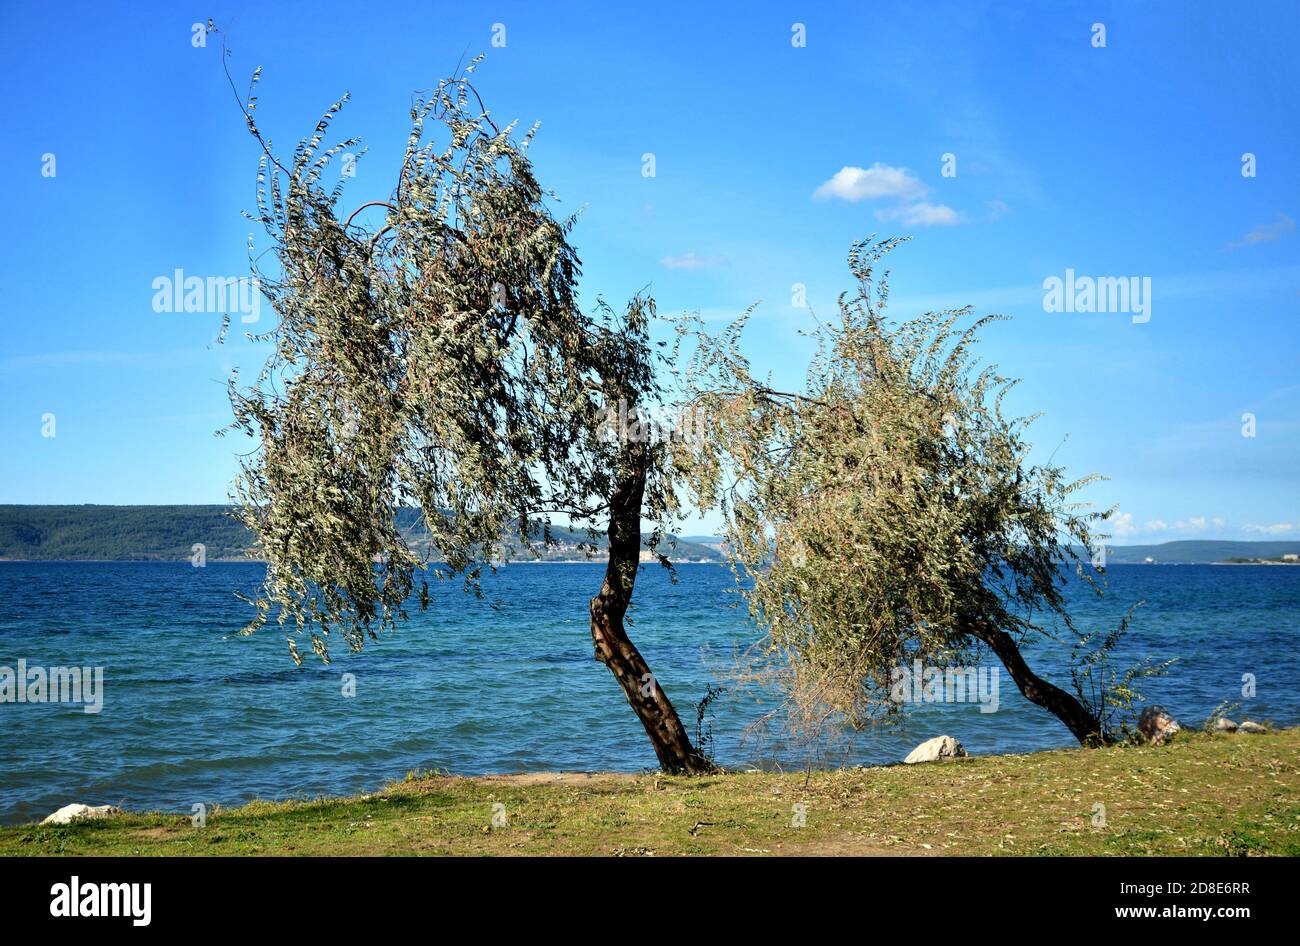 Lonely branchy oleaster trees against blue sky at seaside in fall season. Double trees. Elaeagnus angustifolia, Russian olive, Persian olive trees. Stock Photo